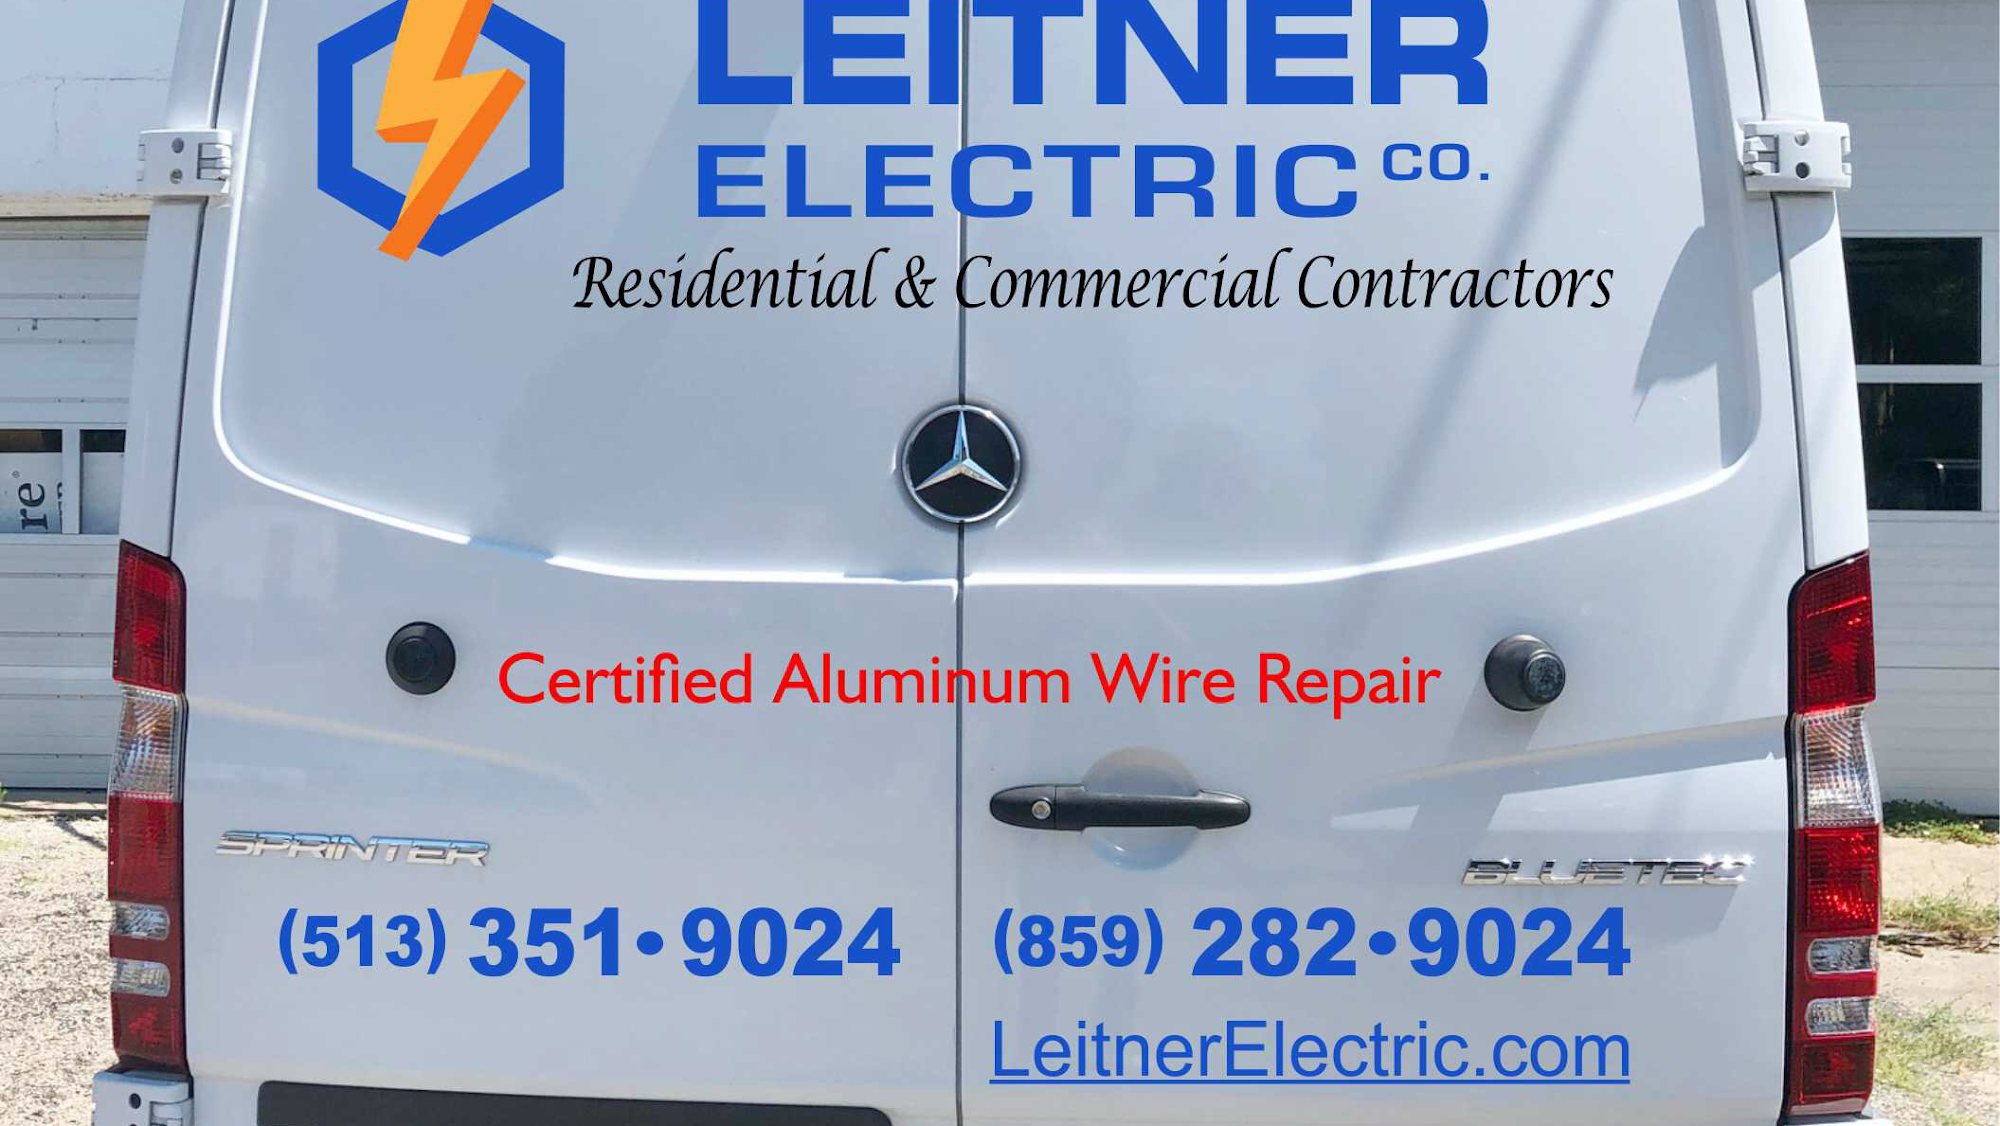 Leitner Electric Co